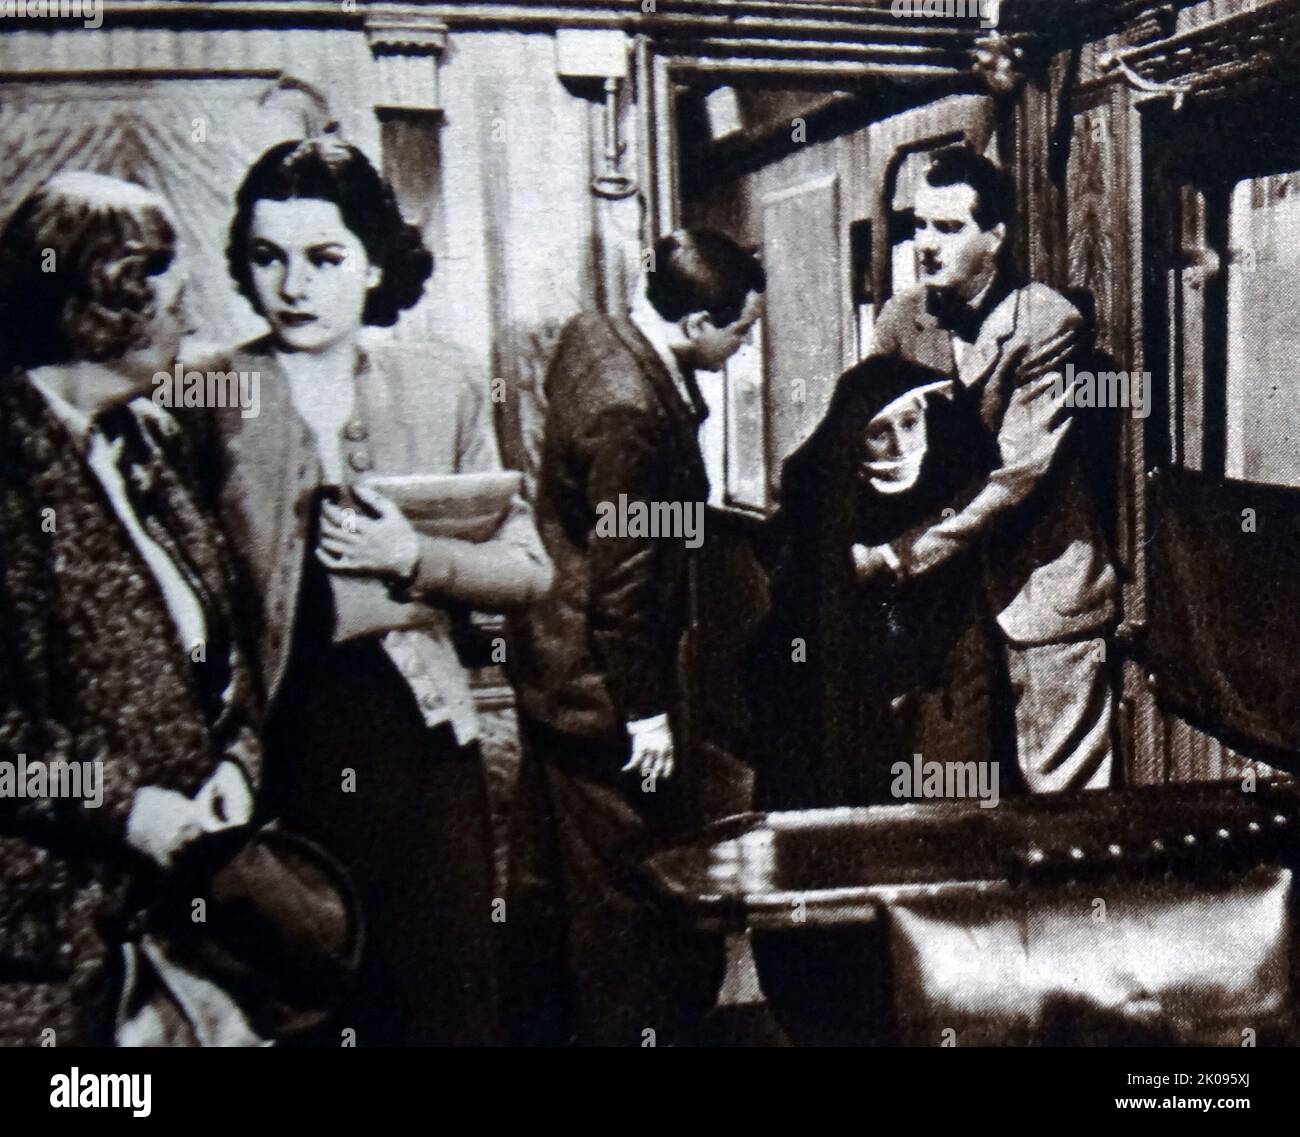 May Whitty, Margaret Lockwood, Naunton Wayne, Catherine Lacey and Michael Redgrave in The Lady Vanishes. The Lady Vanishes is a 1938 British mystery thriller film directed by Alfred Hitchcock. Dame Mary Louise Webster, DBE (nee Whitty; 19 June 1865 - 29 May 1948), known professionally as May Whitty and later, for her charity work, Dame May Whitty, was an English stage and film actress. Margaret Lockwood, CBE (15 September 1916 - 15 July 1990), was an English actress. Naunton Wayne (born Henry Wayne Davies, 22 June 1901 - 17 November 1970), was a Welsh character actor, born in Pontypridd, Glamo Stock Photo